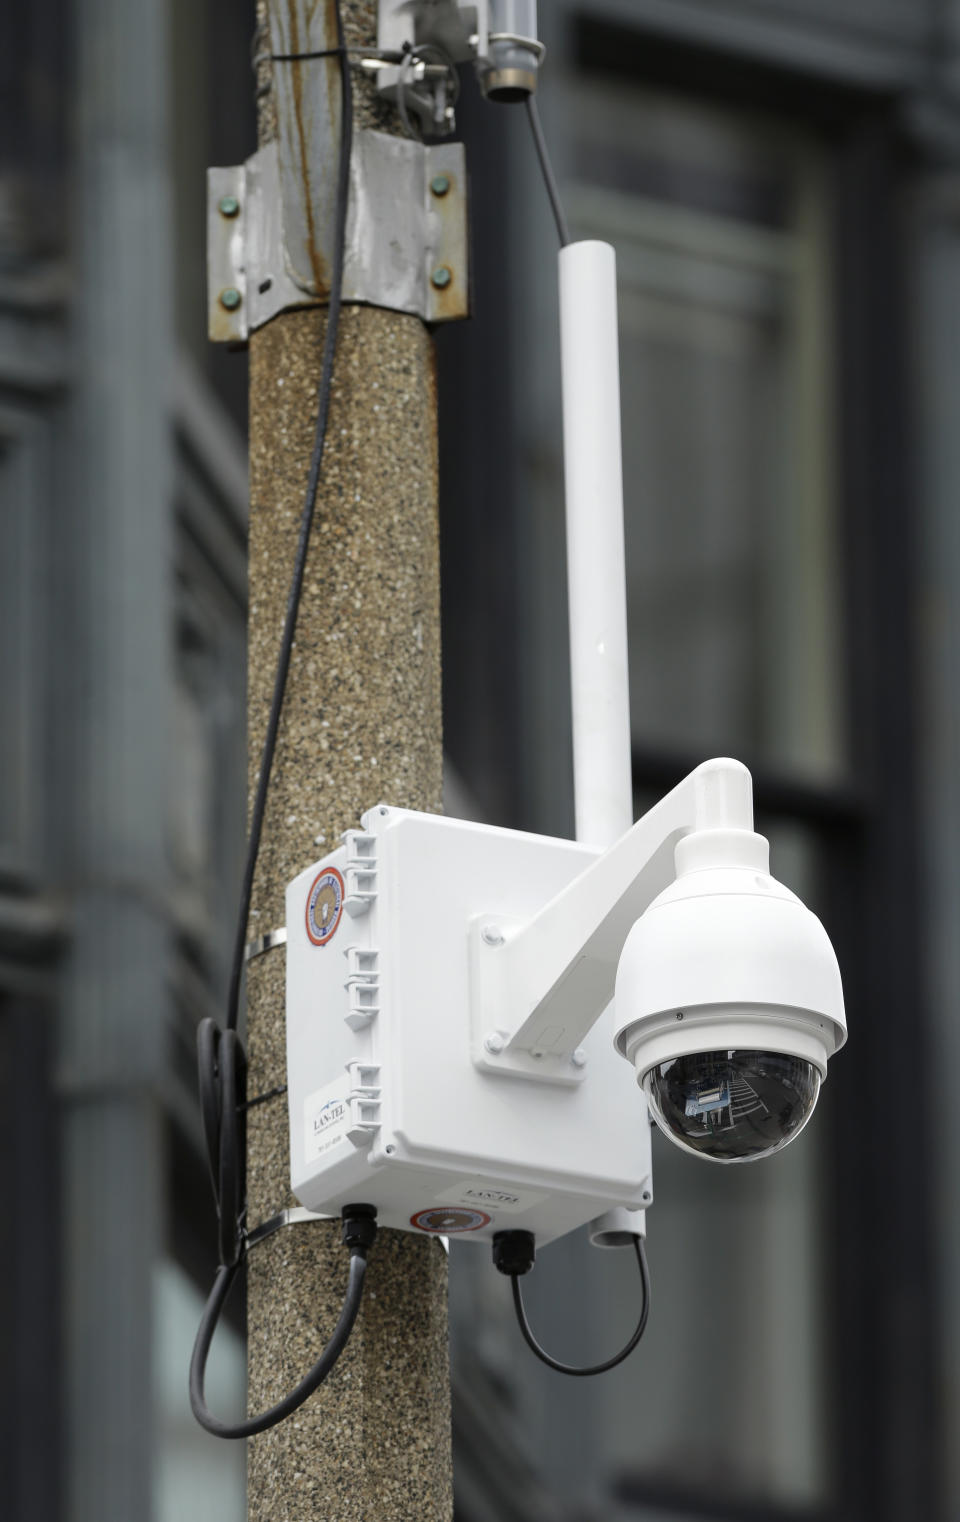 A surveillance camera is attached to a light pole along Boylston Street near the finish line of the Boston Marathon, Monday, April 14, 2014, in Boston. A year after twin pressure cooker bombs shattered the marathon and paralyzed the area for days, federal prosecutors say they have a trove of evidence ready to use against the surviving suspect, but many questions remain. (AP Photo/Steven Senne)